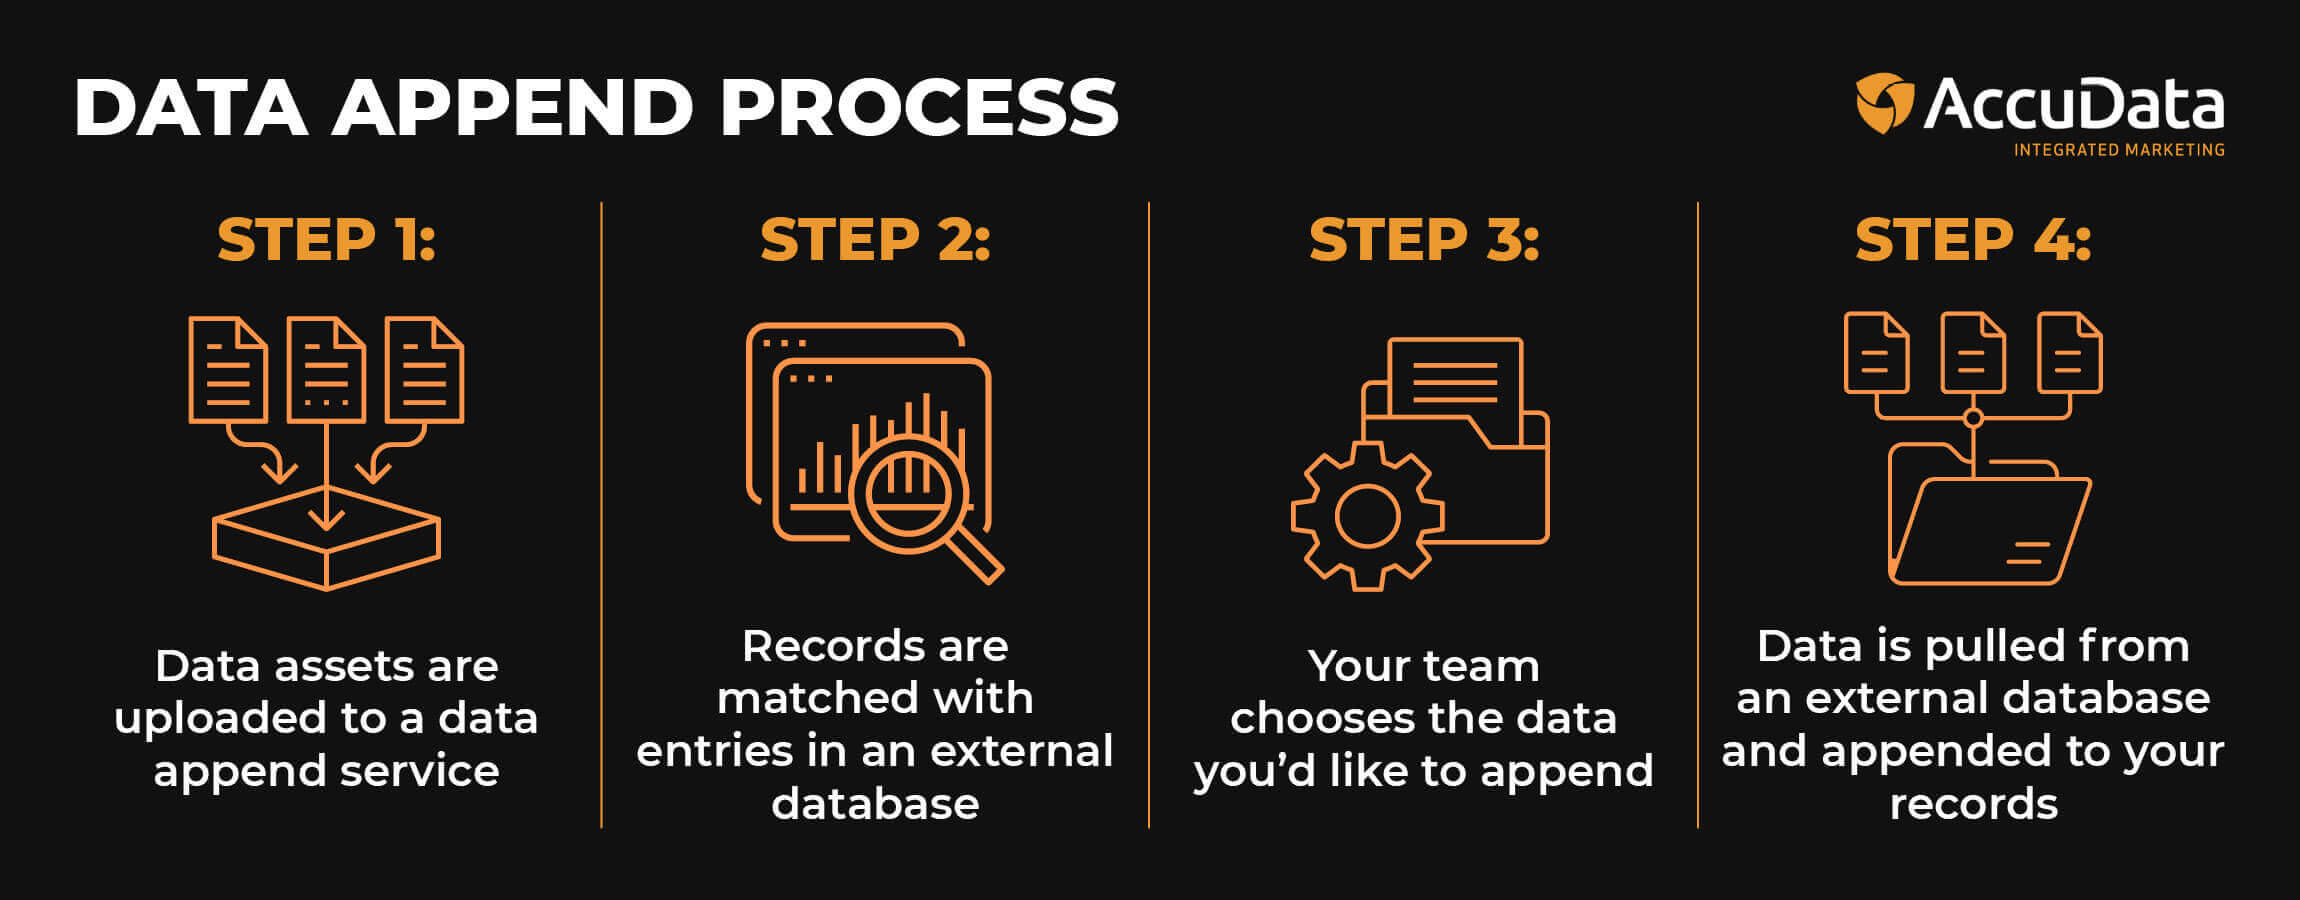 The data append process occurs in four simple steps.